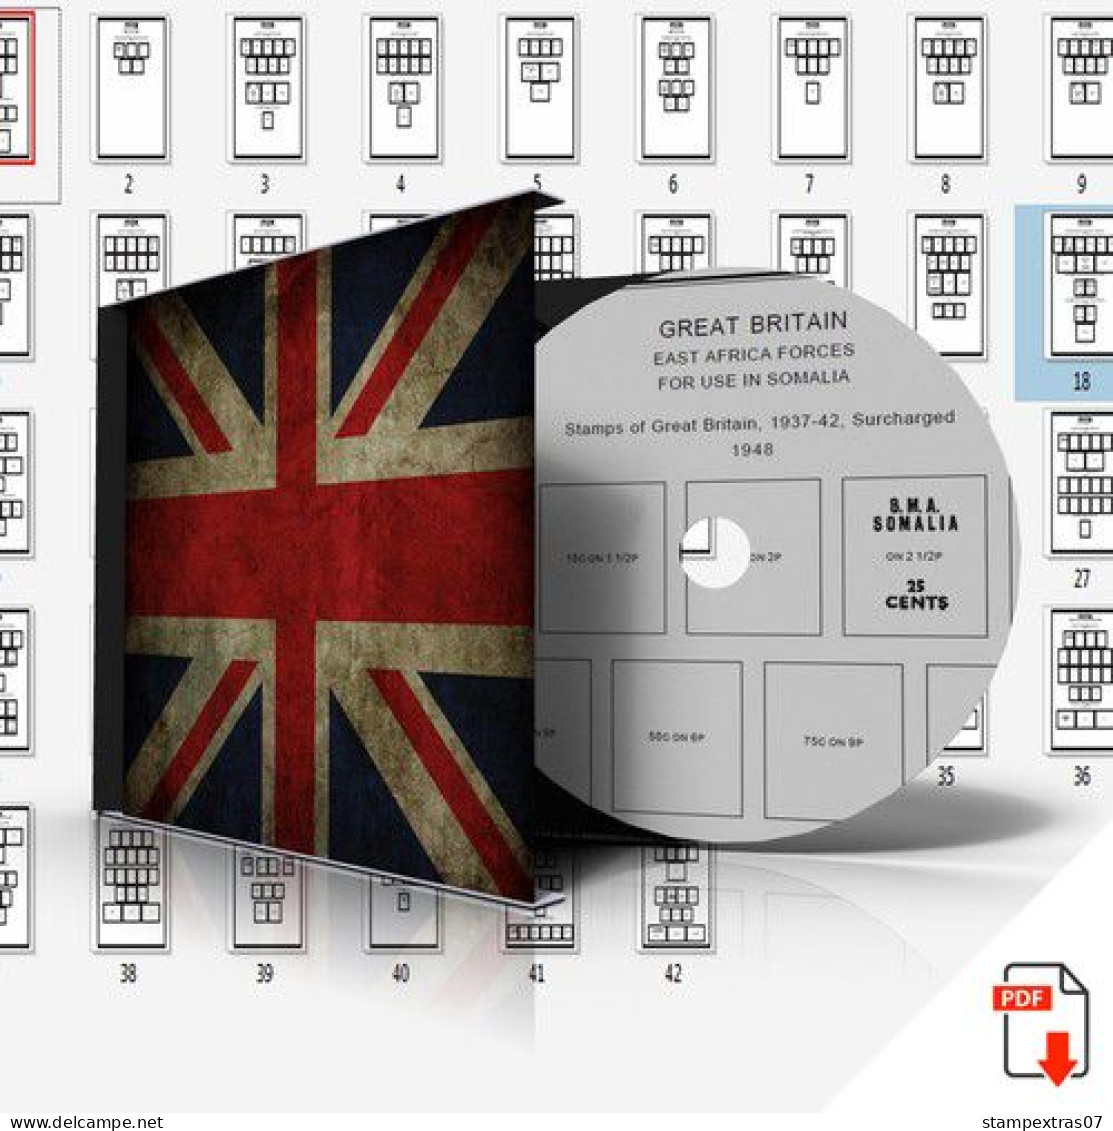 GREAT BRITAIN ADDITIONS STAMP ALBUM PAGES 1937-2011 (107 Pages) - Anglais